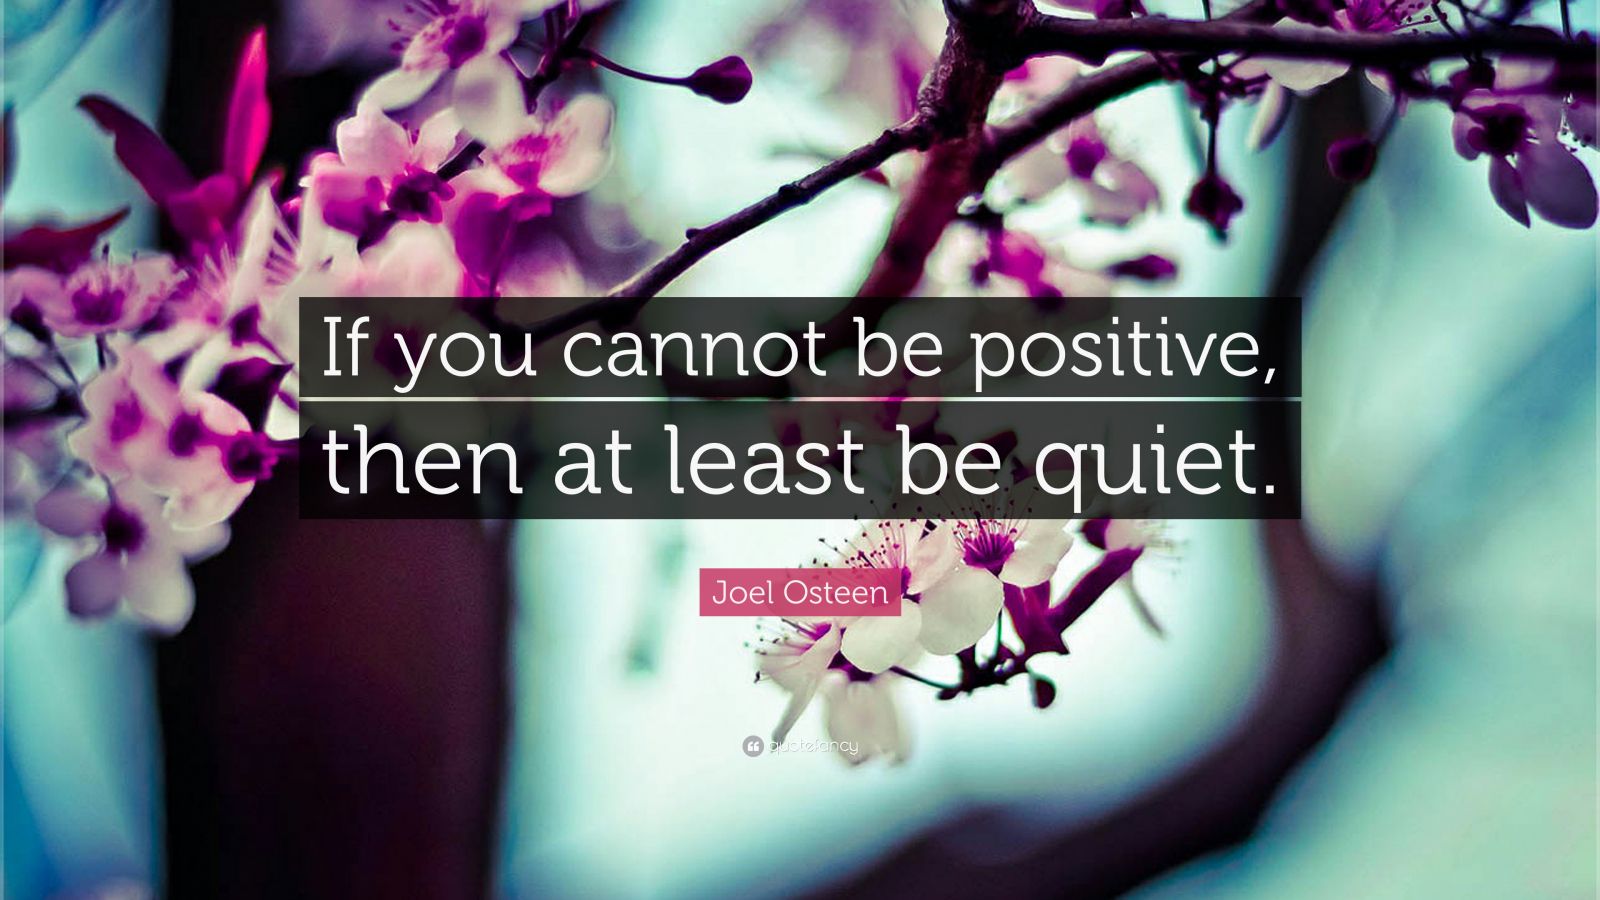 Joel Osteen Quote “if You Cannot Be Positive Then At Least Be Quiet